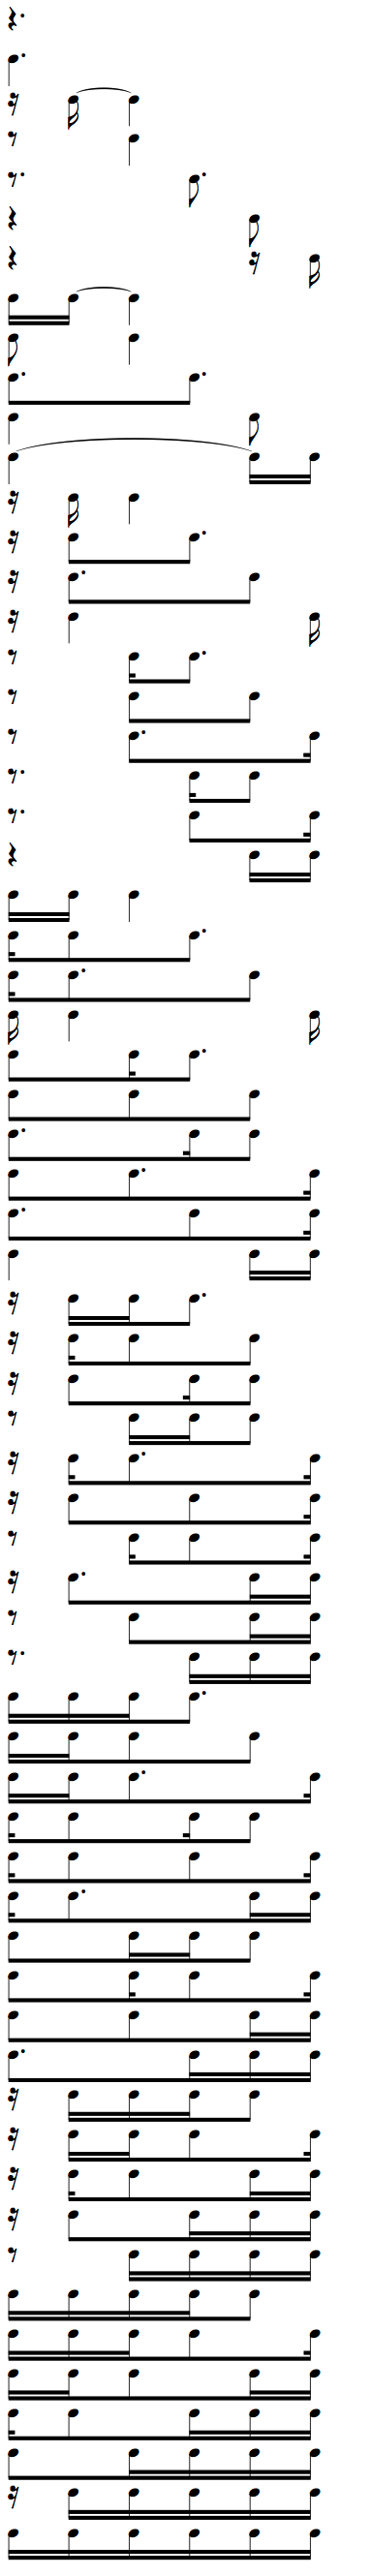 Complete Rhythms cheat sheet for Dotted Quarter Note with 16th Notes